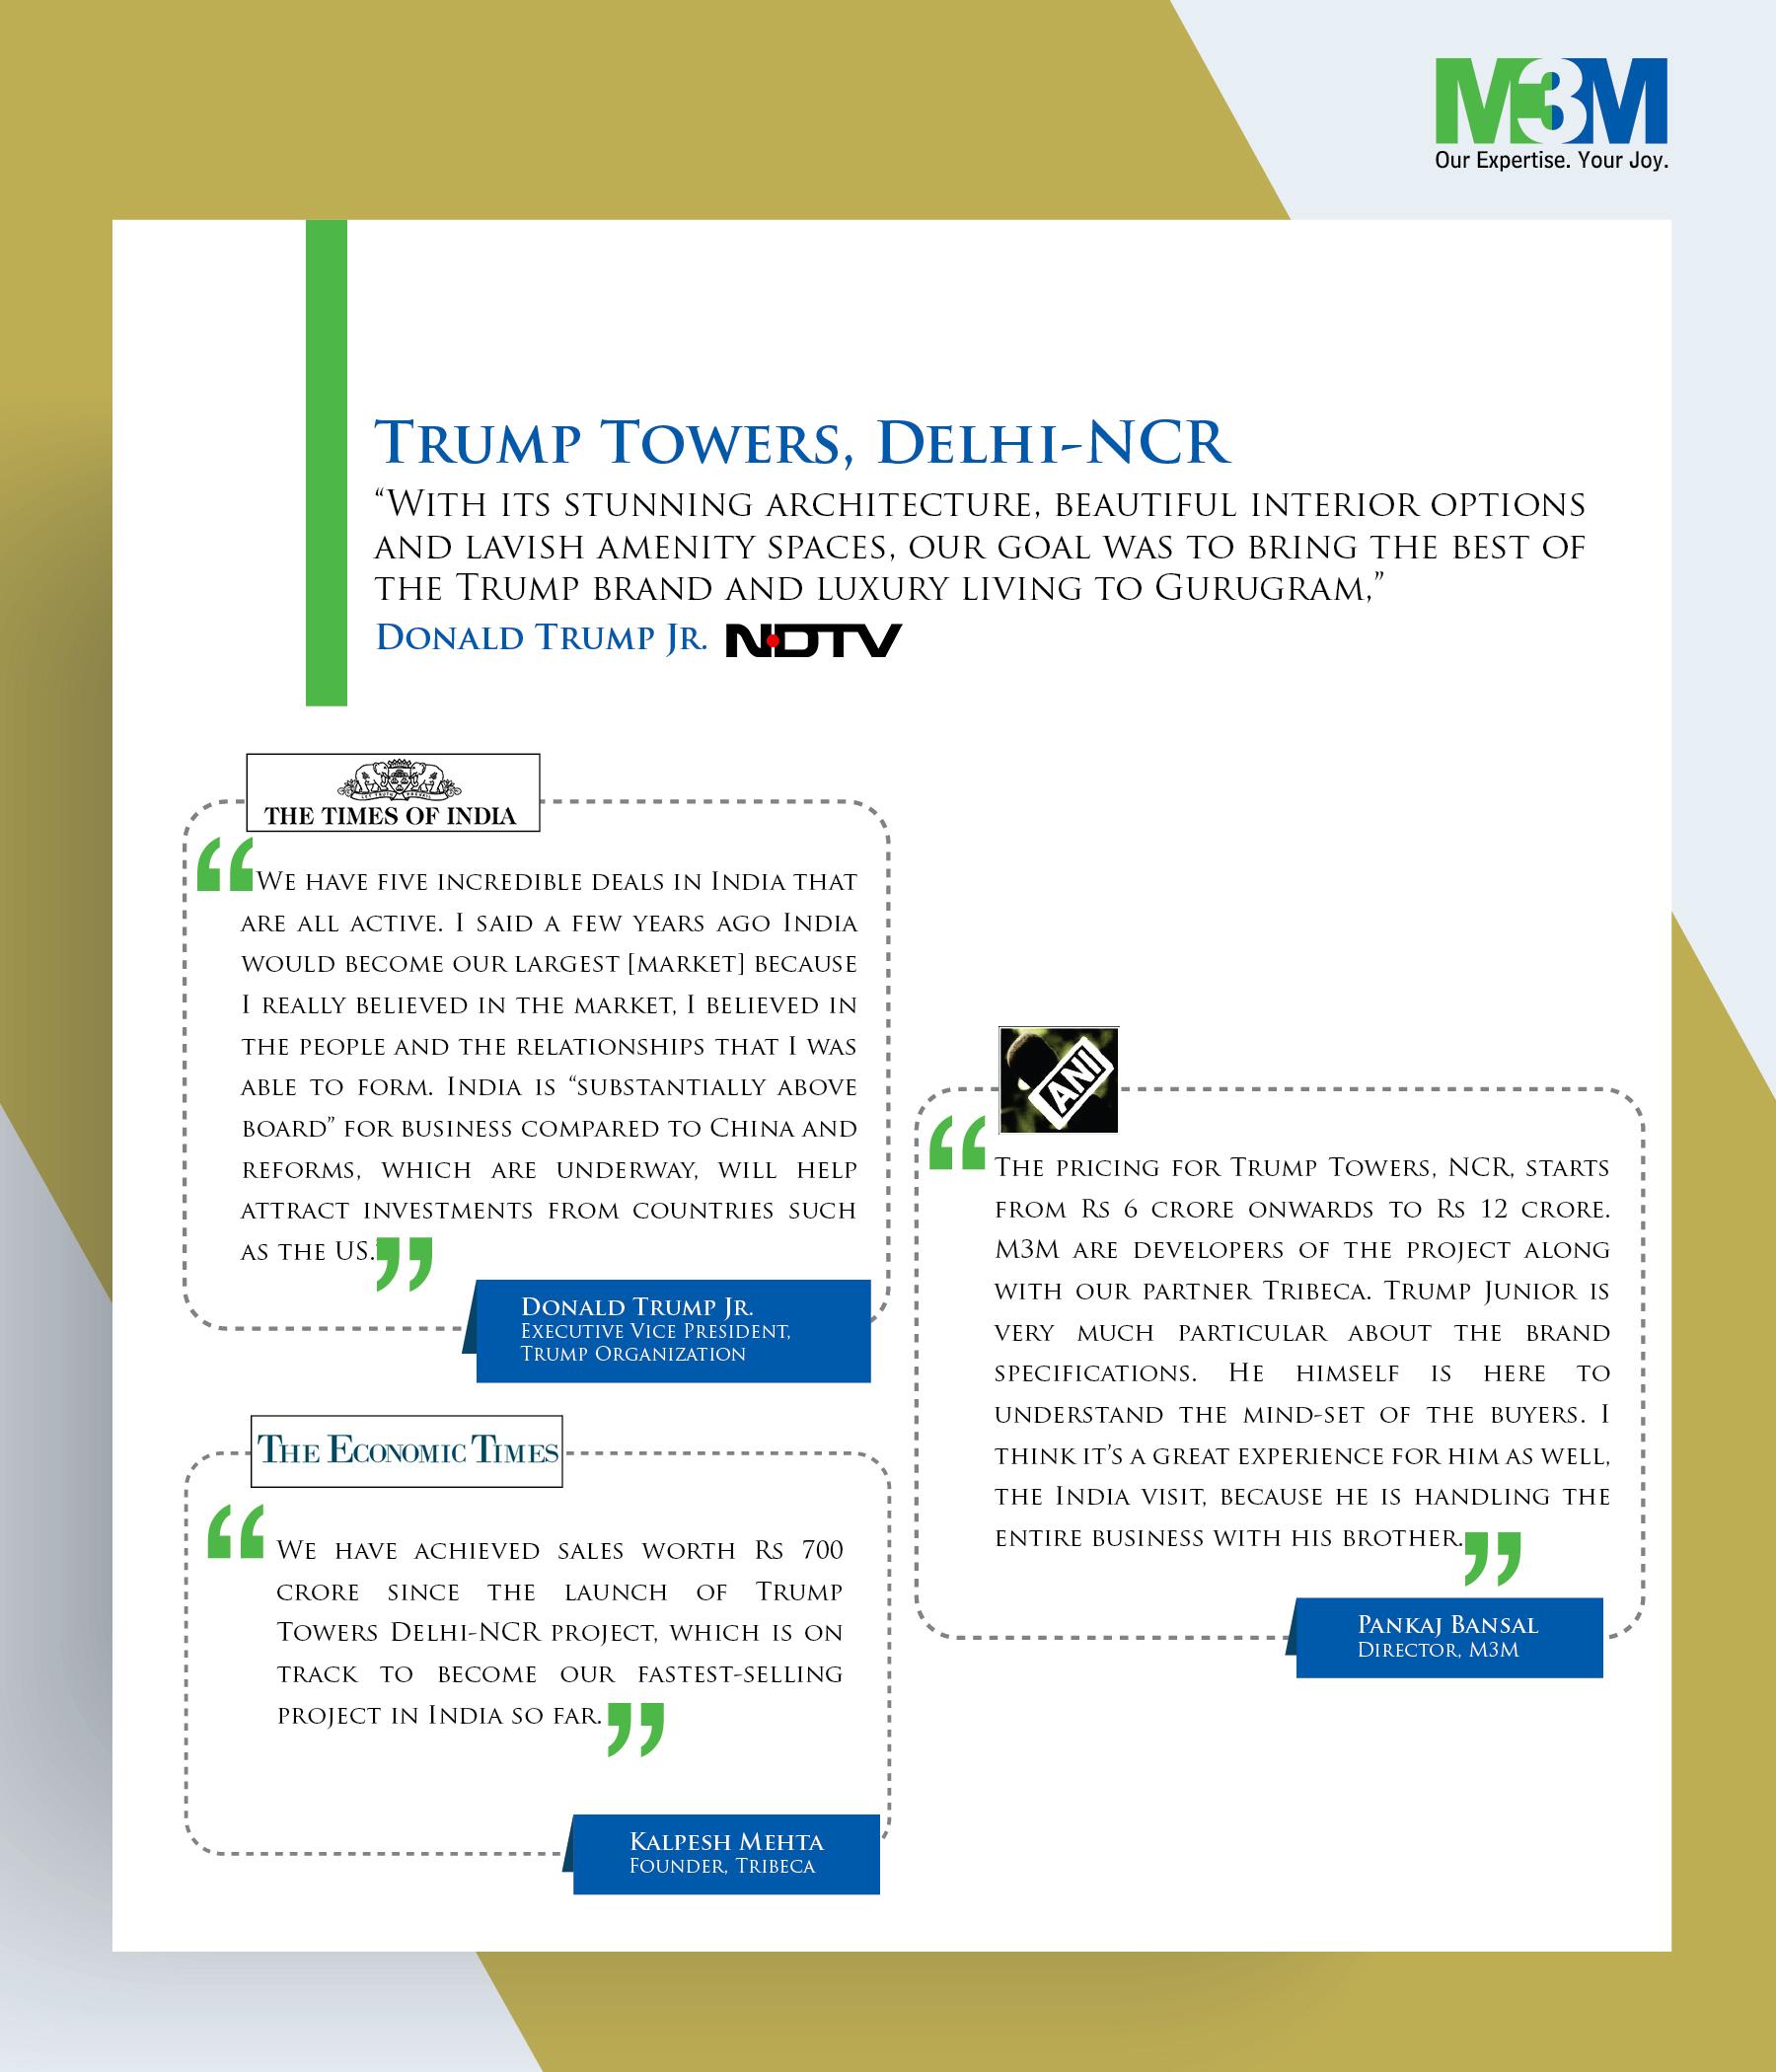 Donald Trump Jr talked about prospects in Indian realty market for Trump Towers Delhi NCR Update